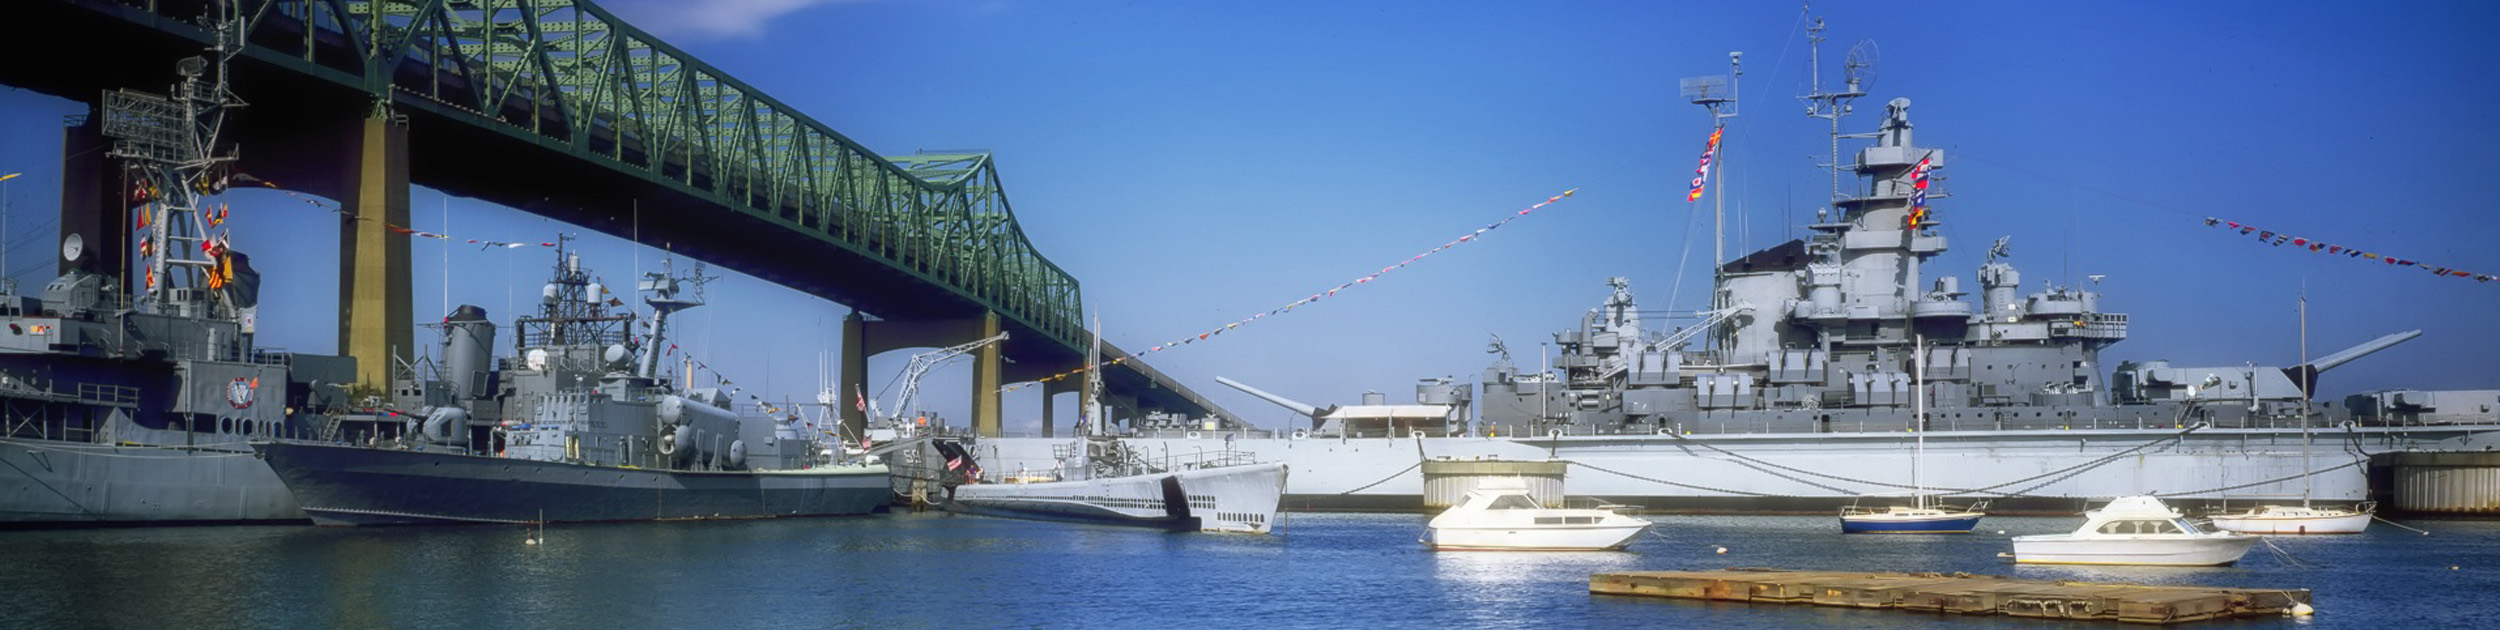 Battleship Cove in Fall River MA with bridge and lots of boats